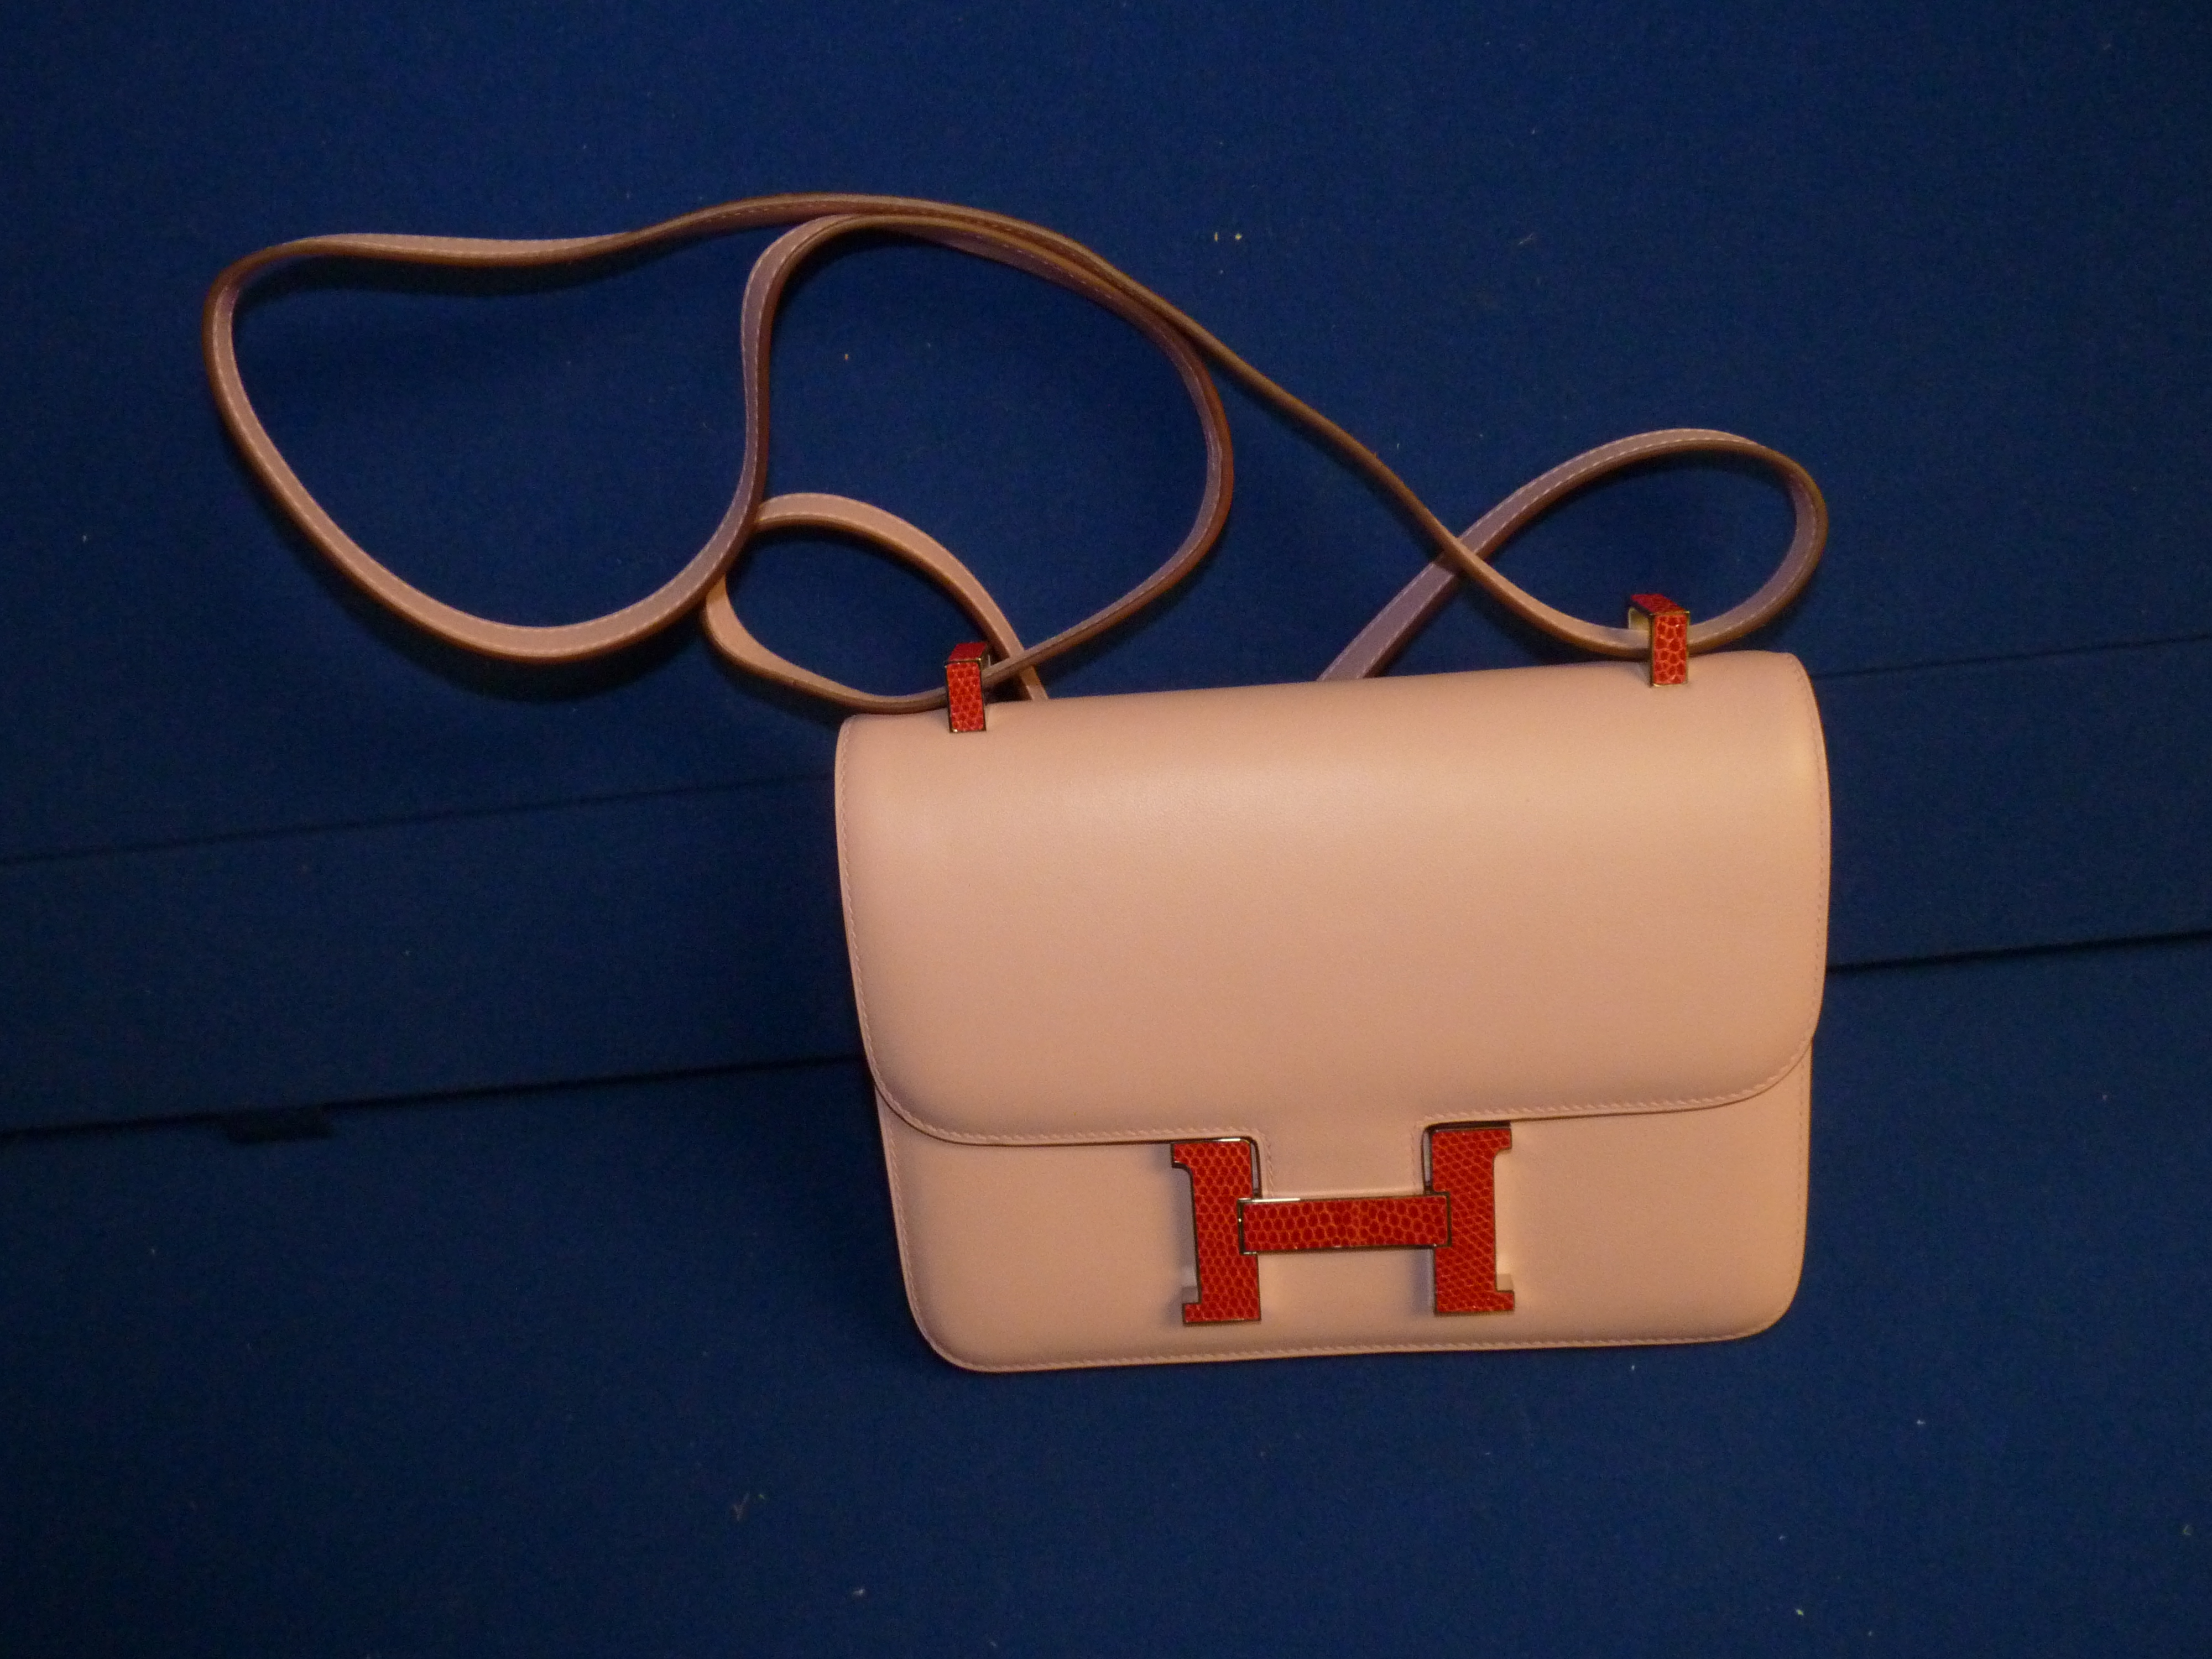 Hermes Constance handbag 24cm in pink with box and bag etc.Marked GLY745 - Image 10 of 11